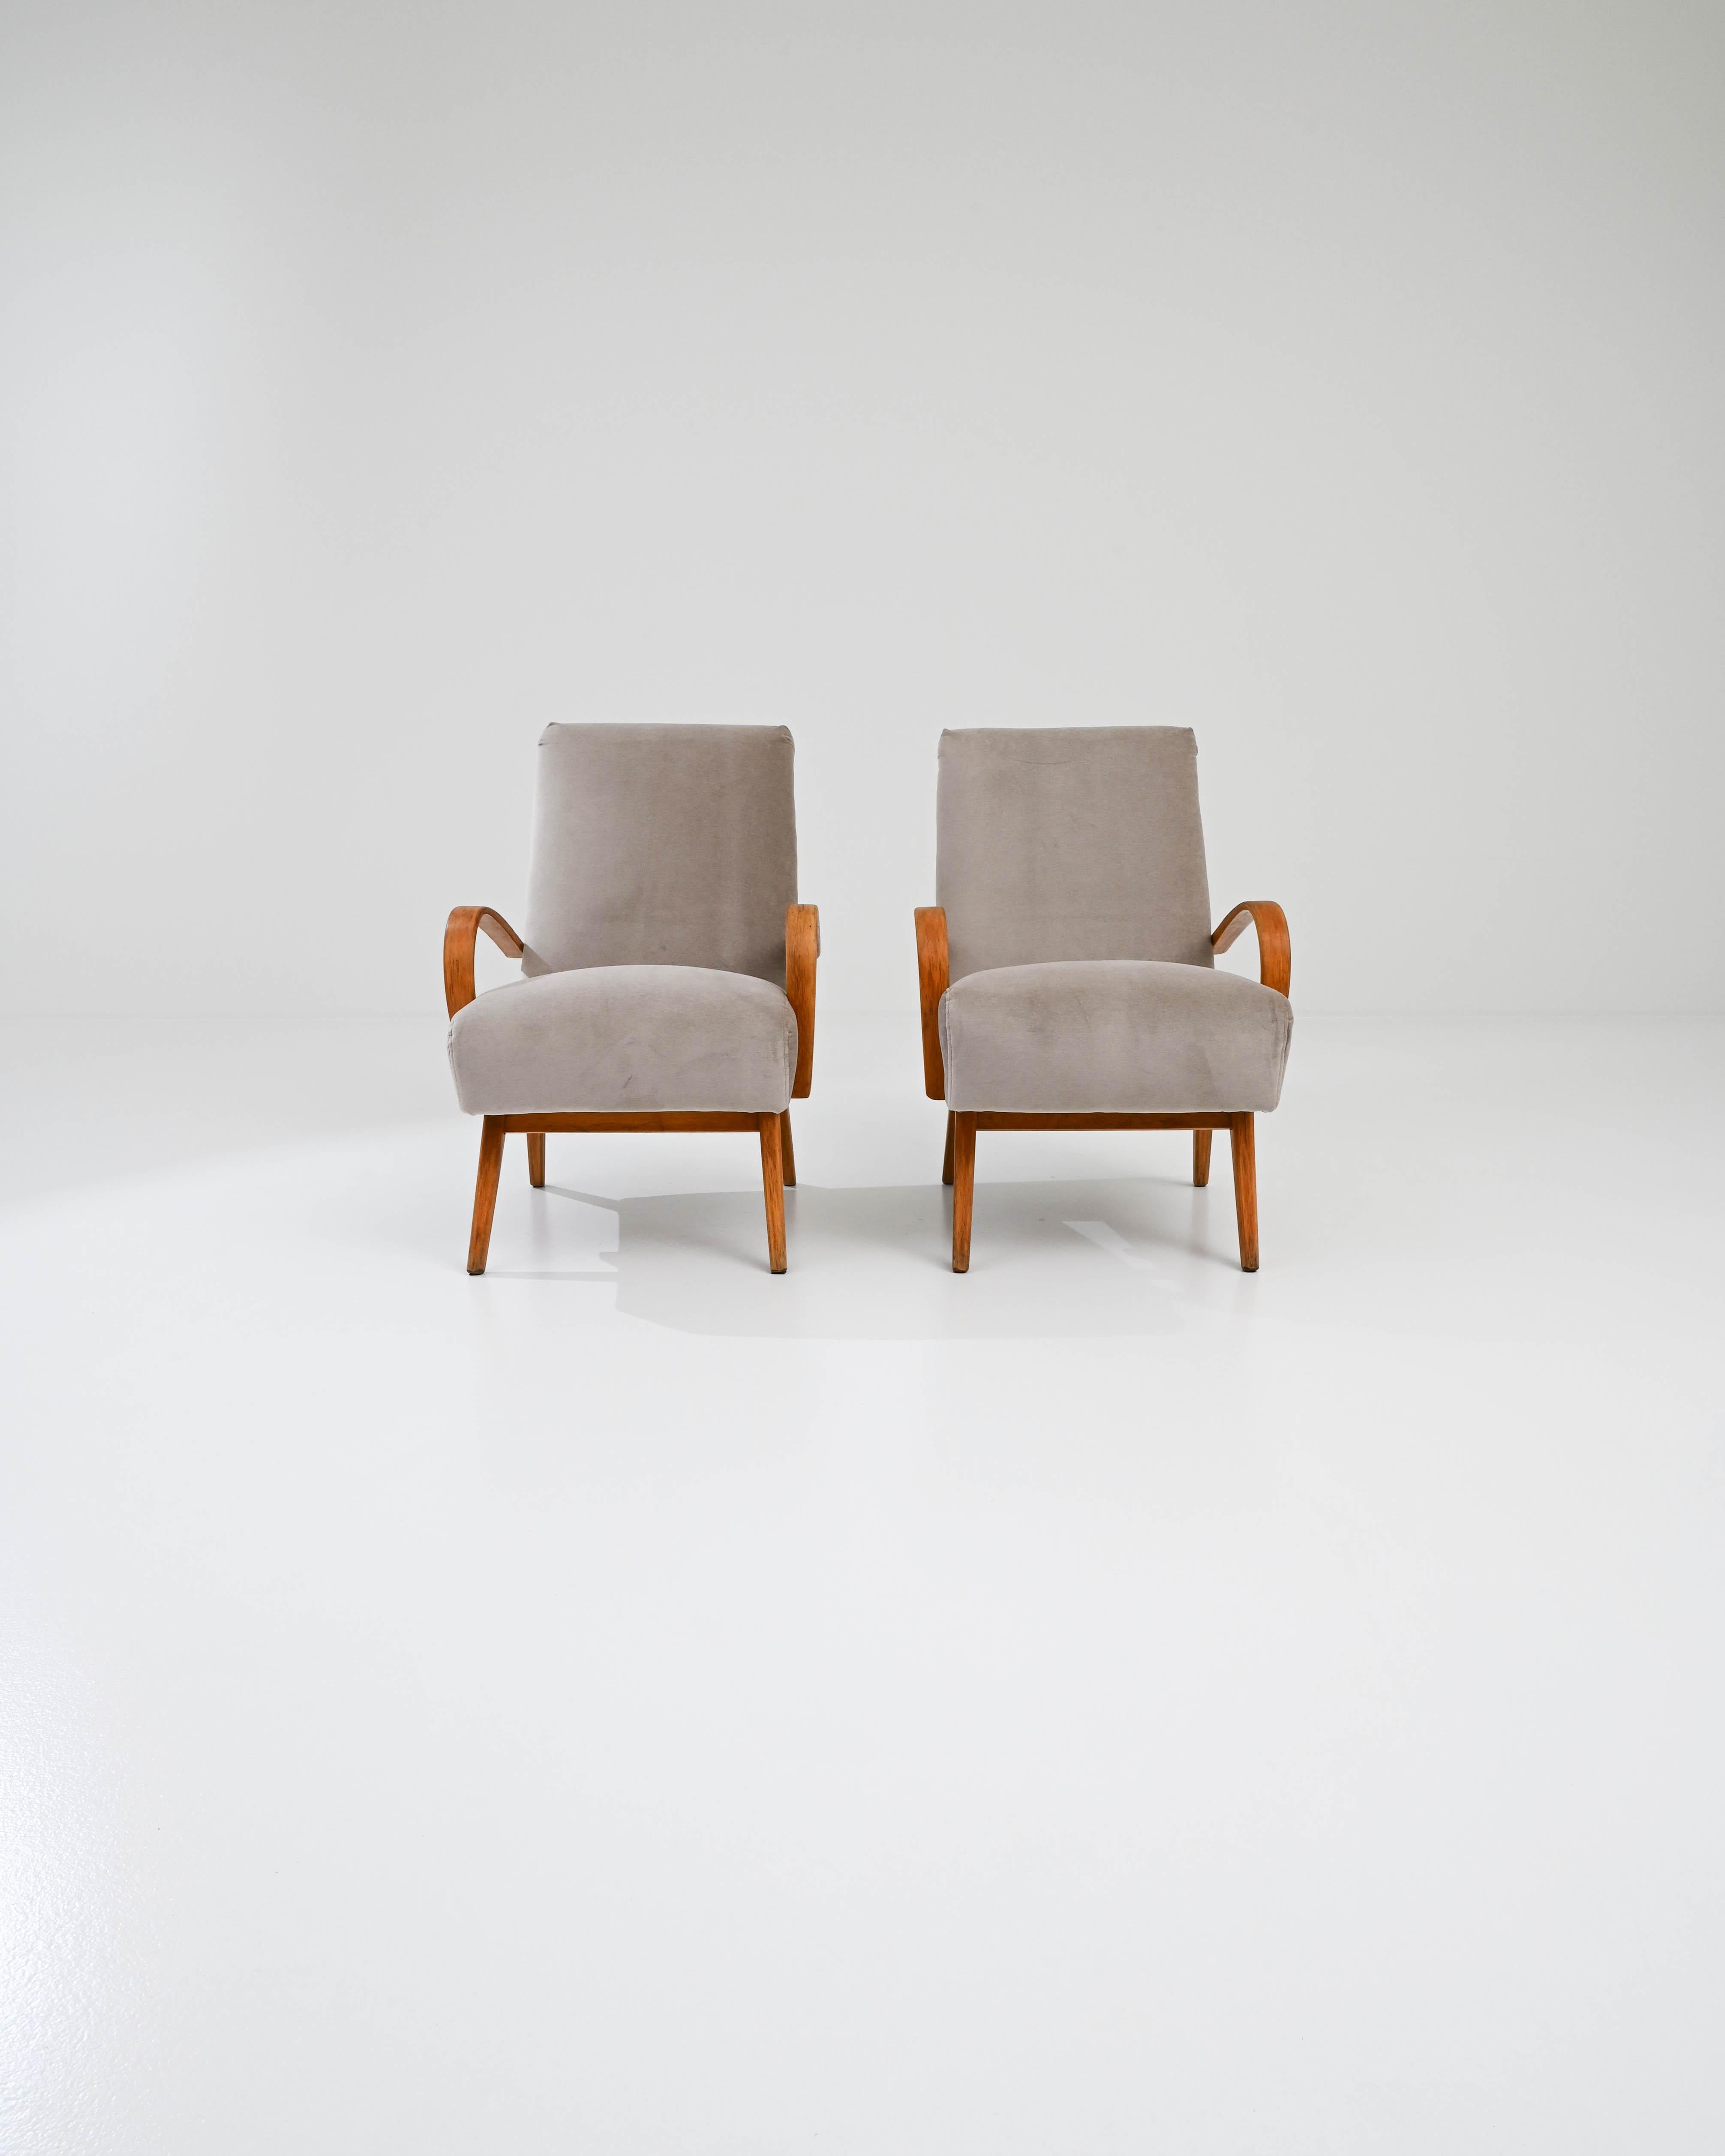 Mid-20th Century 1950s Czech Beige Upholstered Armchairs, a Pair For Sale